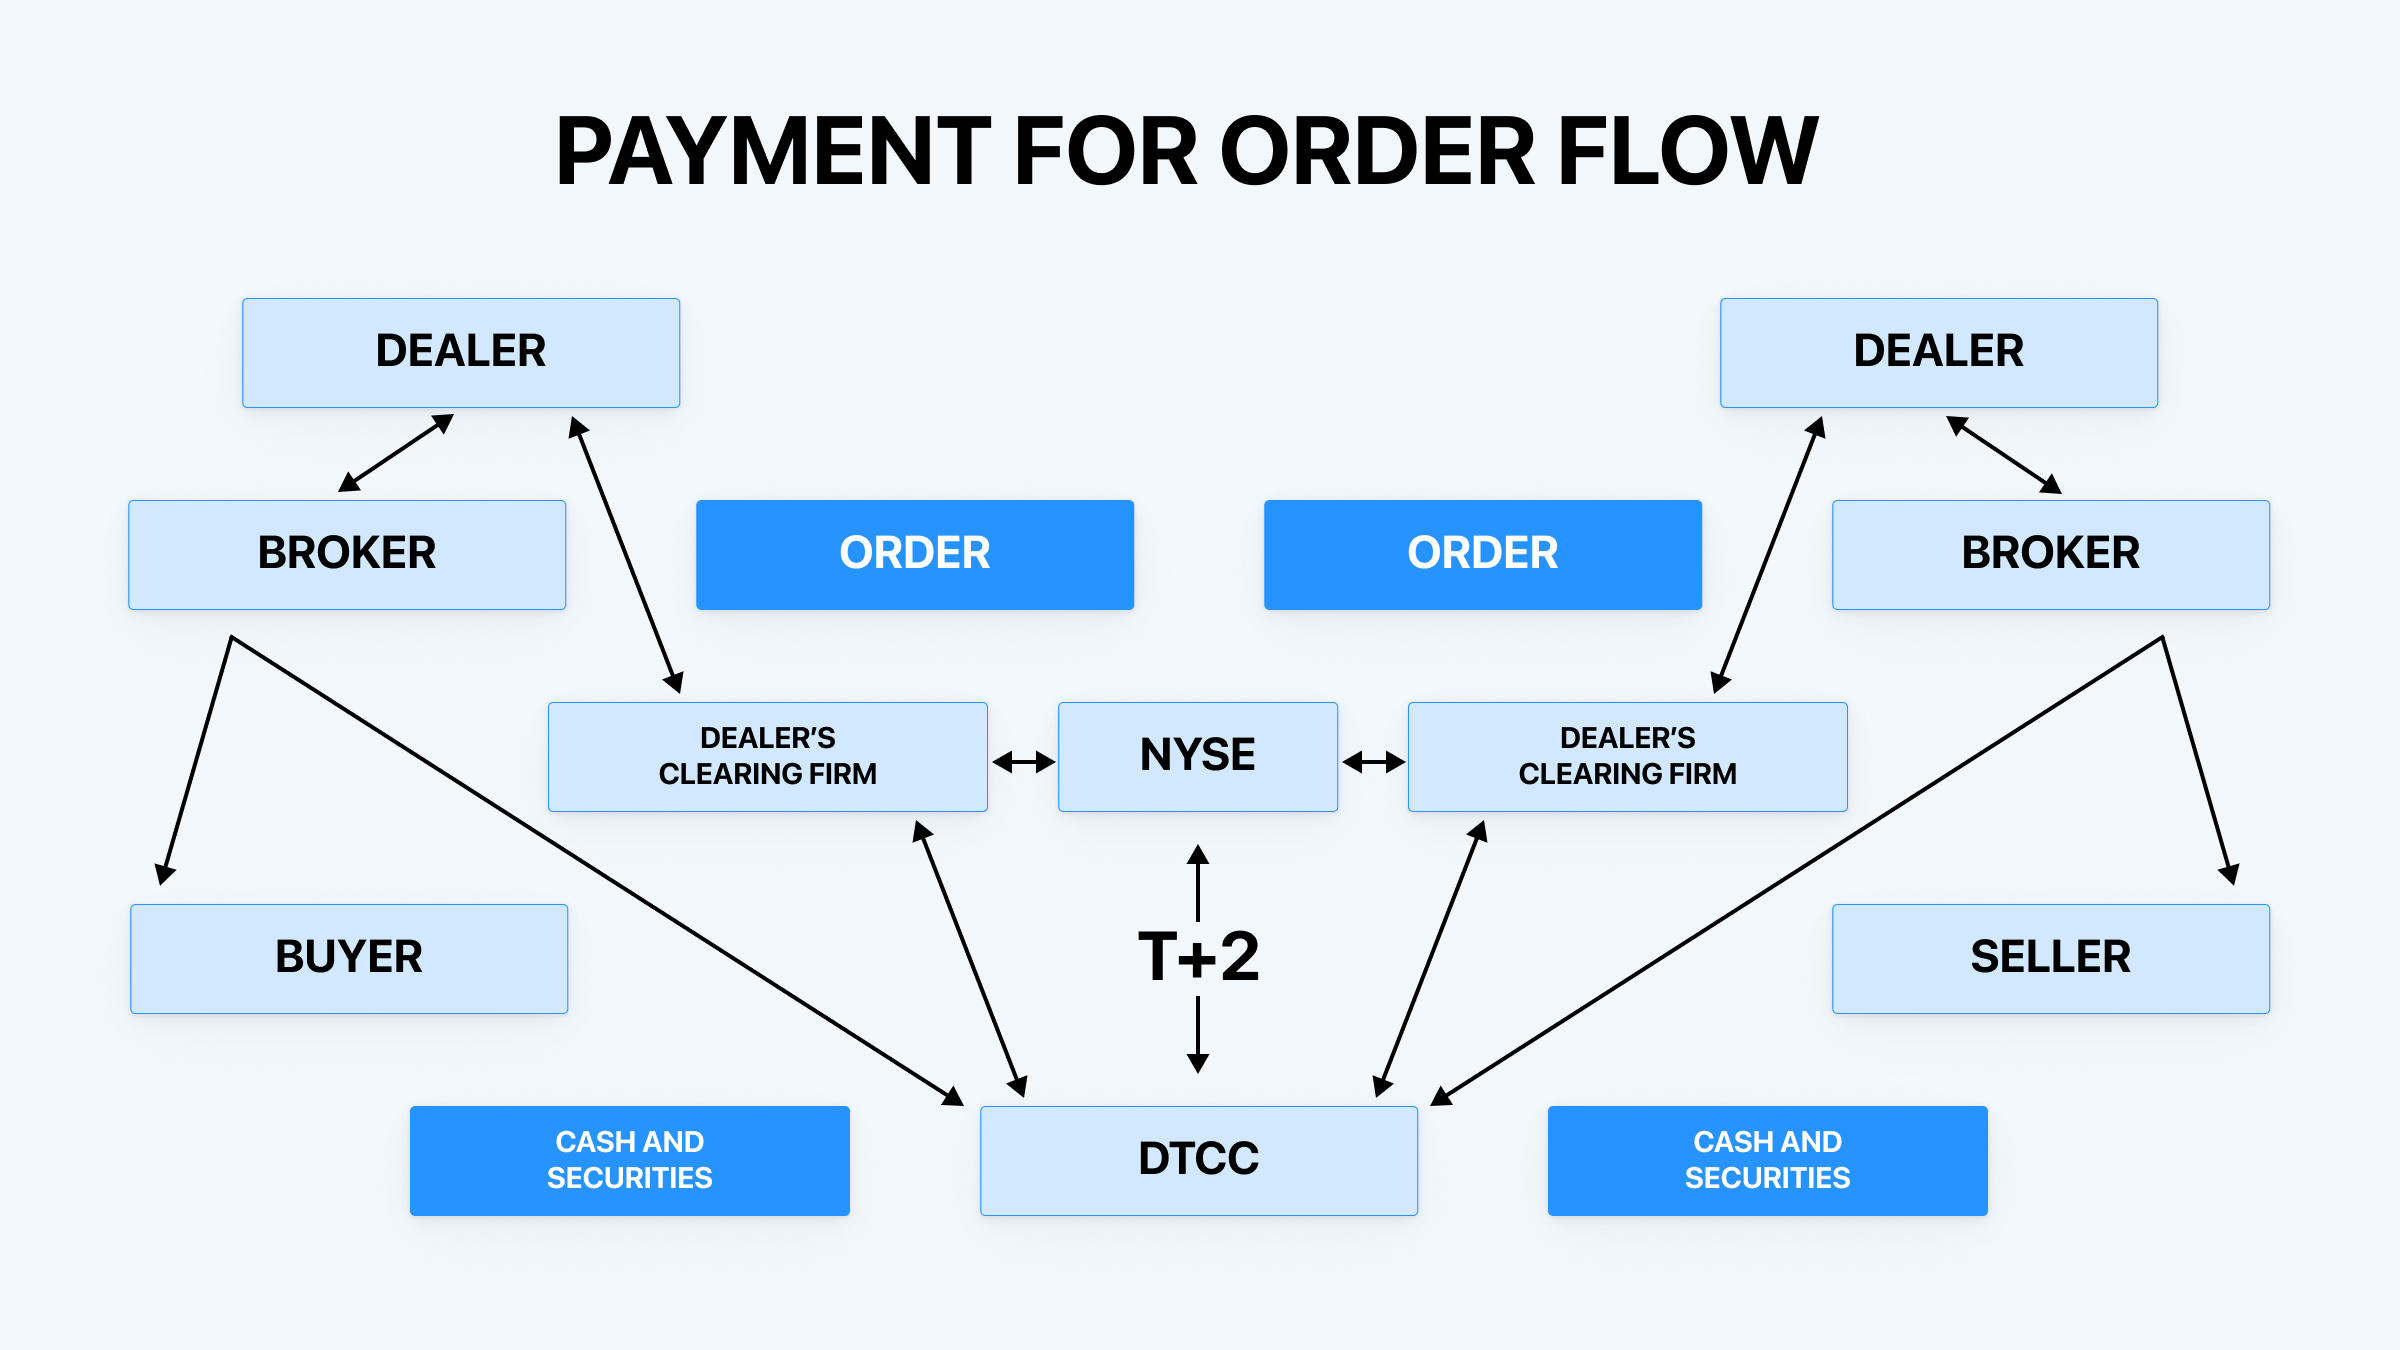 Payment for order flow (PFOF)